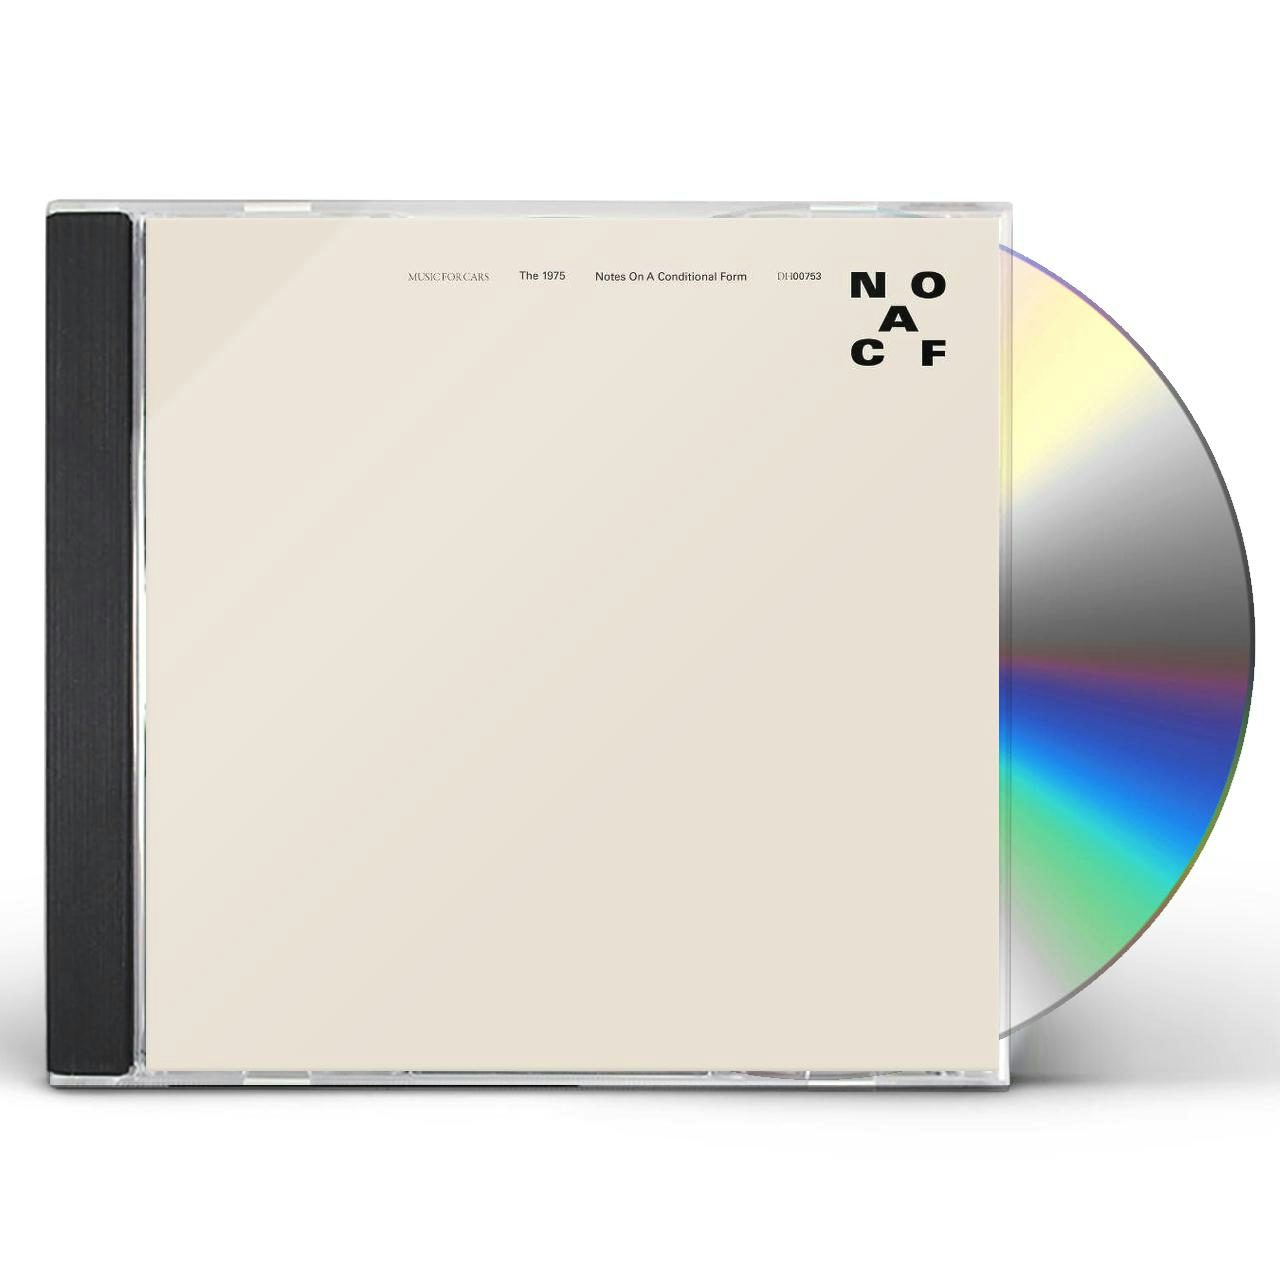 The 1975 NOTES ON A CONDITIONAL FORM CD